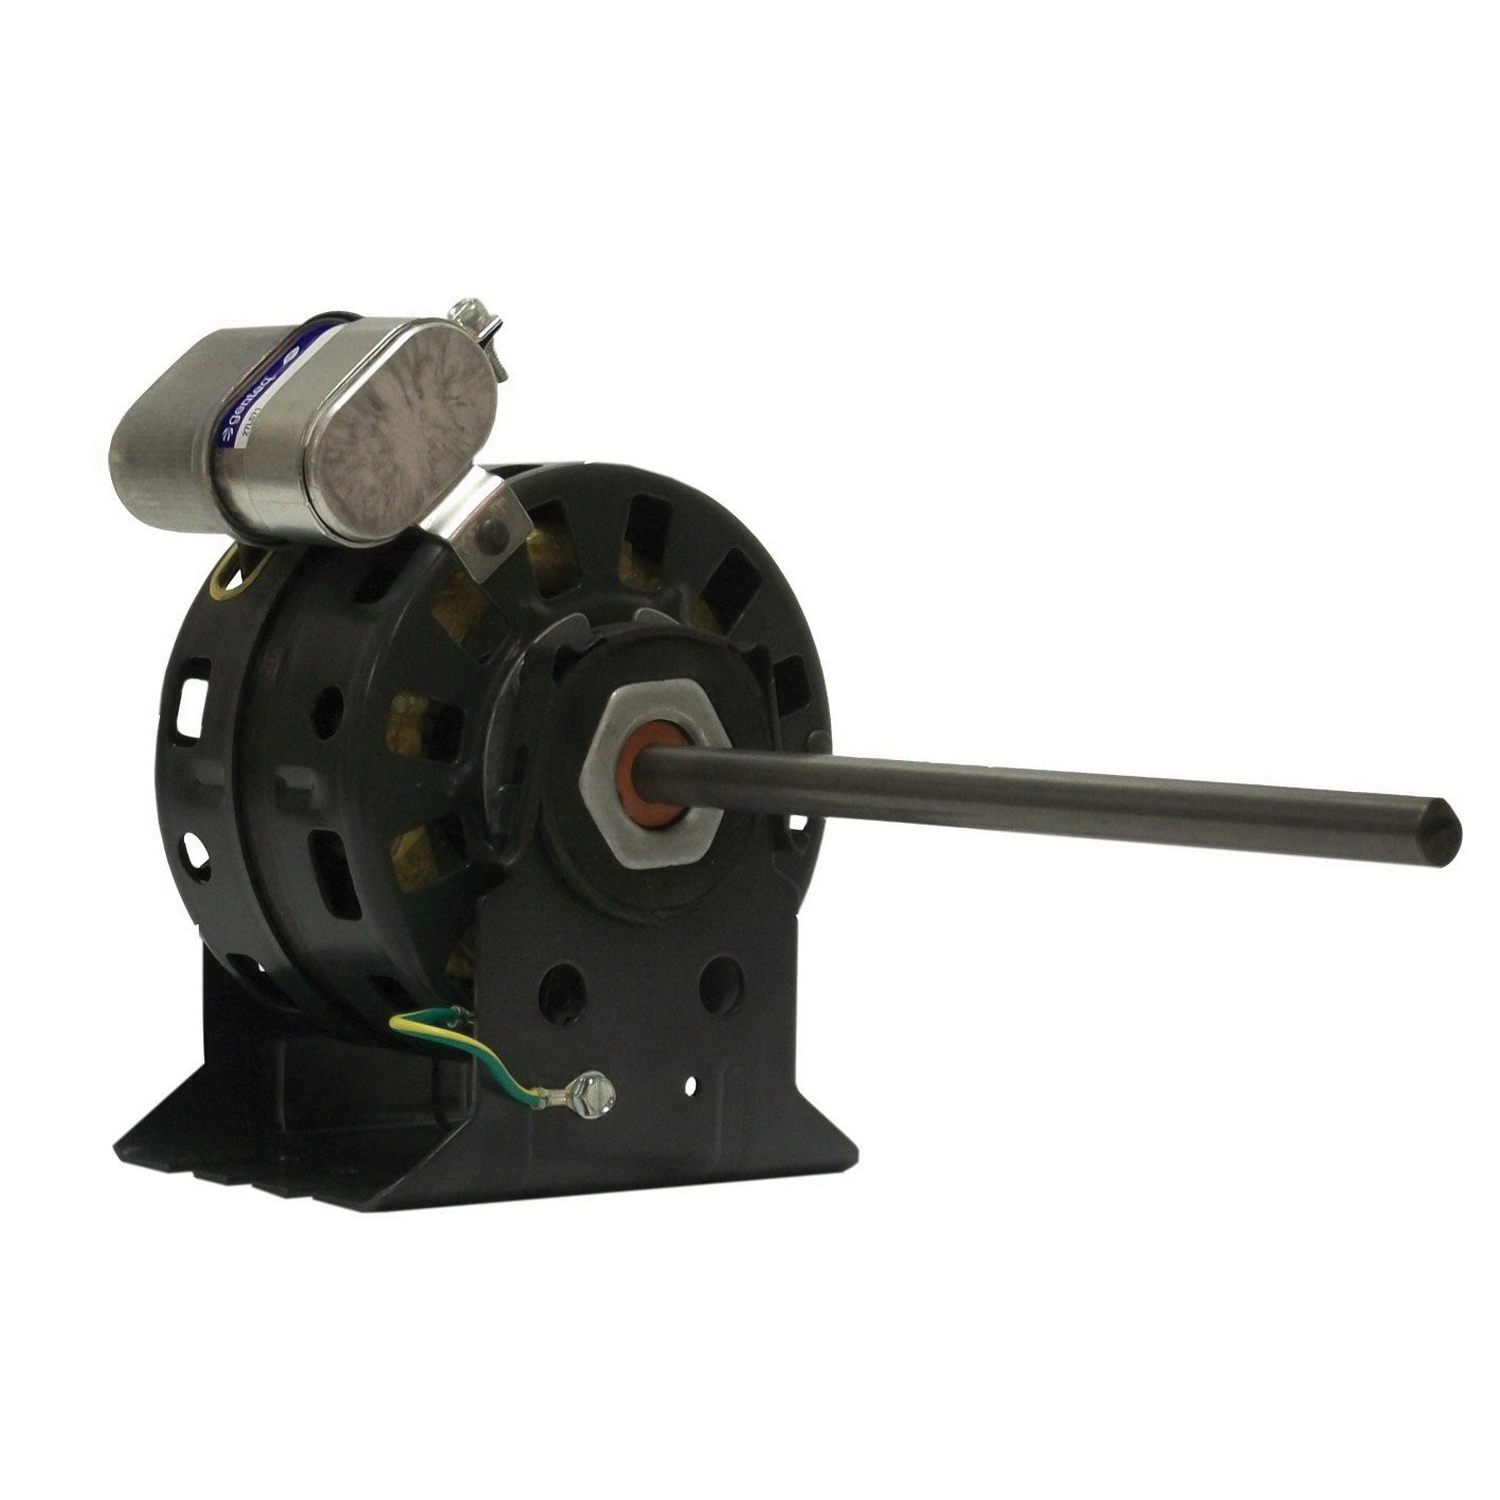 Fasco® D1045 Fan Motor, 115 to 127 V, 0.53 A, 1/30 hp, 1100 rpm Speed, 1 ph, 60 Hz, Open Air Over Motor Enclosure